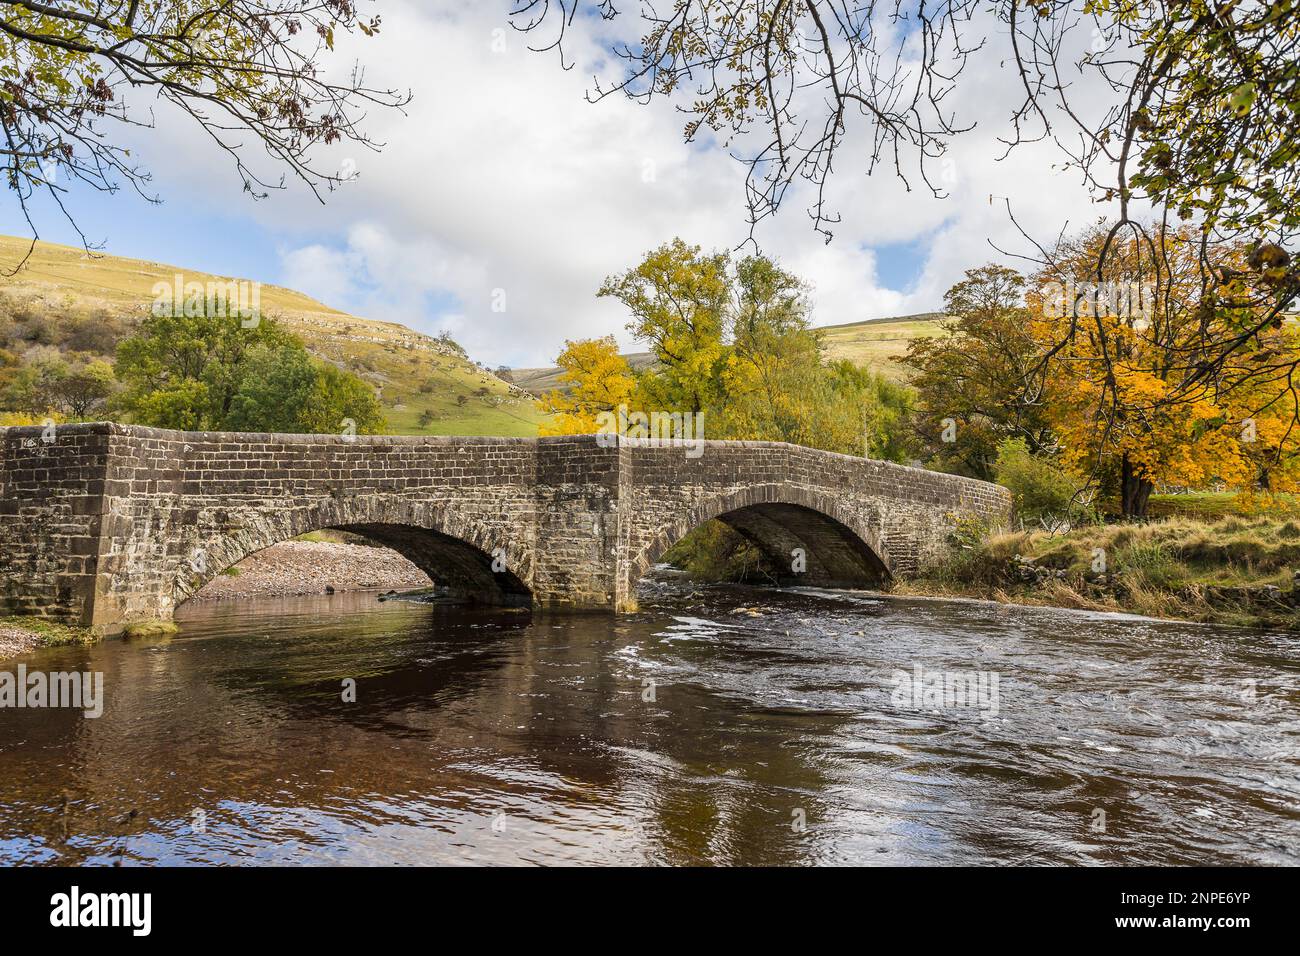 Colourful trees surround and frame the beautiful bridge which spans the River Wharfe in Bucken in the Yorkshire Dales. Stock Photo